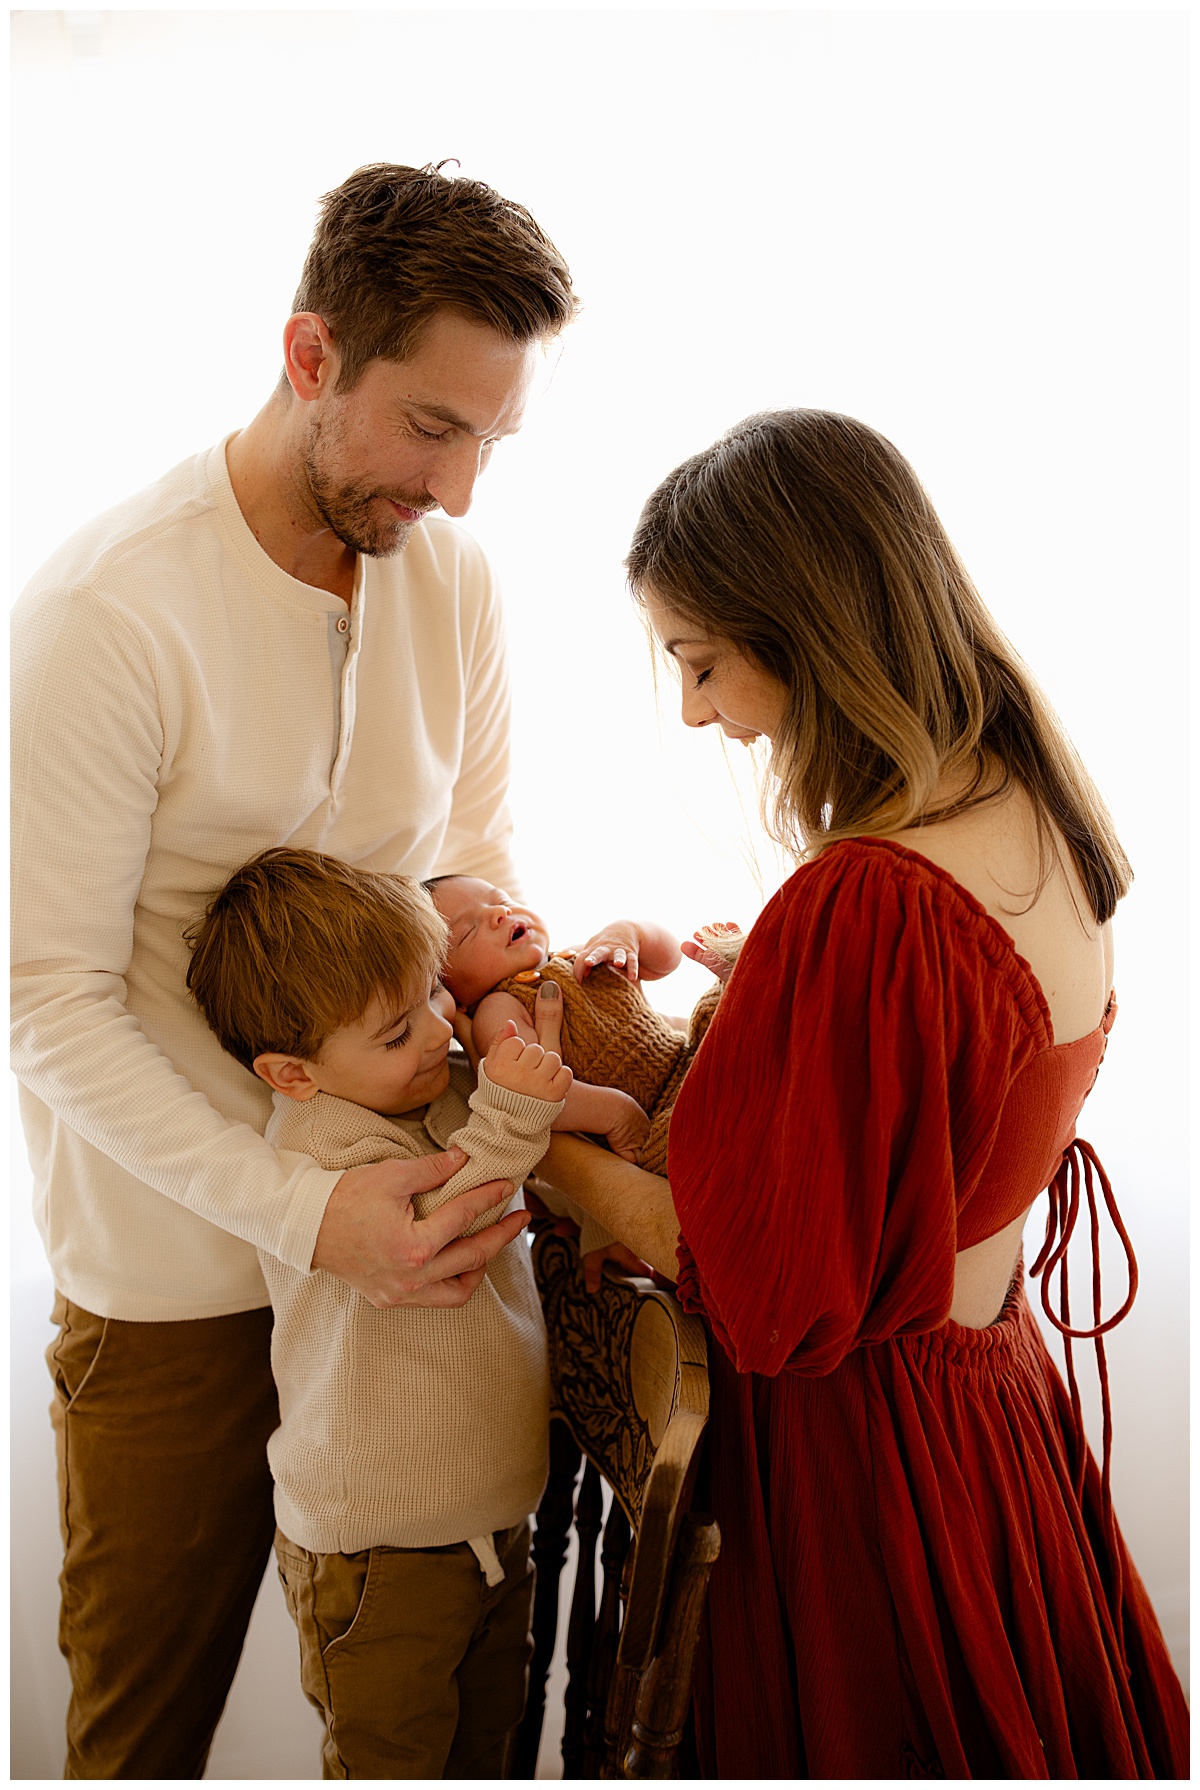 Parents smile at their baby using must-have Gear for Newborn Photography